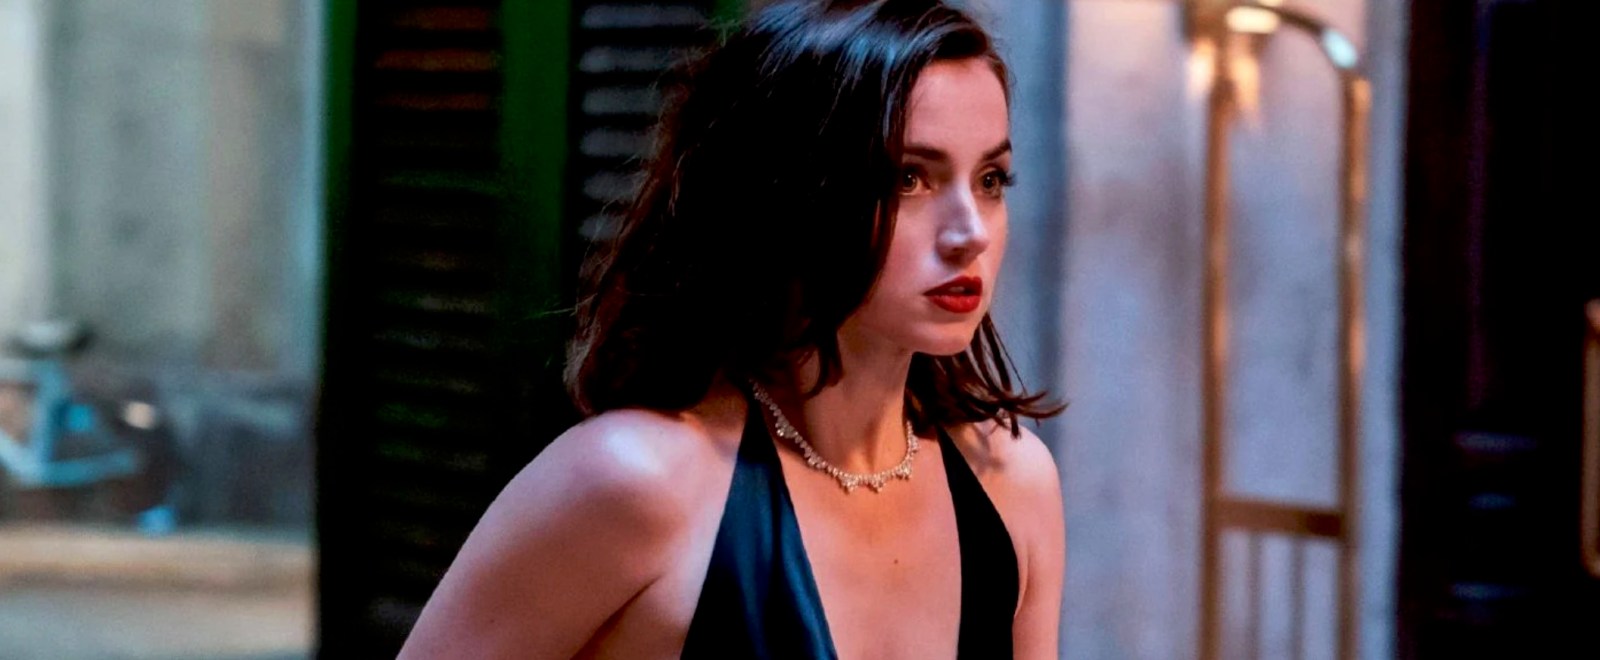 Ana de Armas Says There's 'No Need' For A Female James Bond